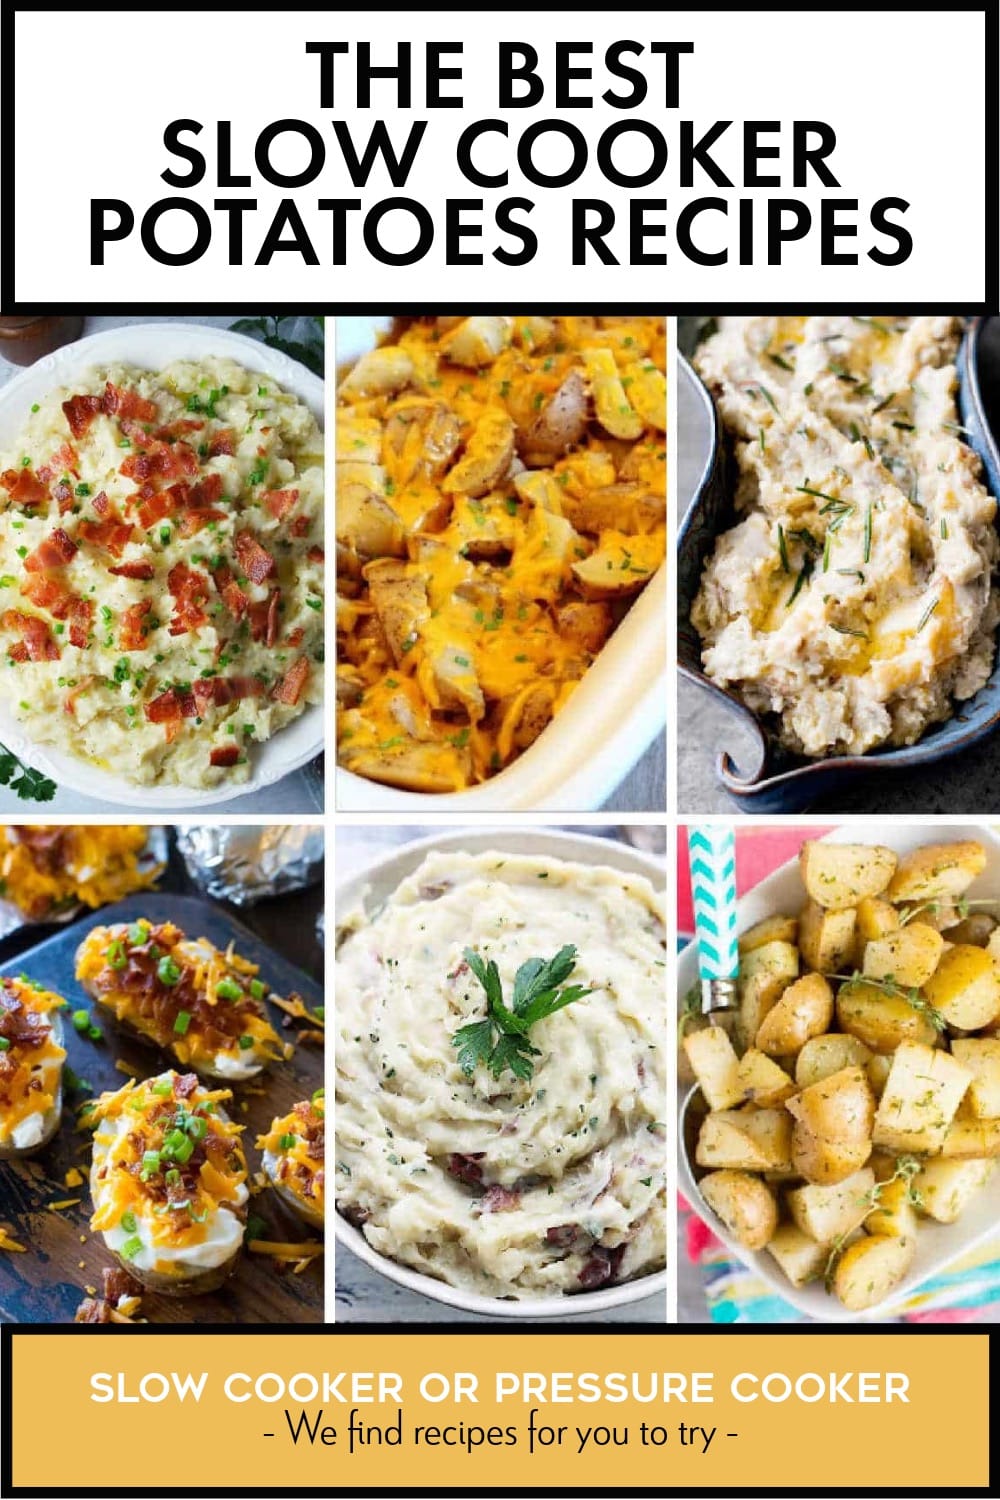 Pinterest image of The Best Slow Cooker Potatoes Recipes